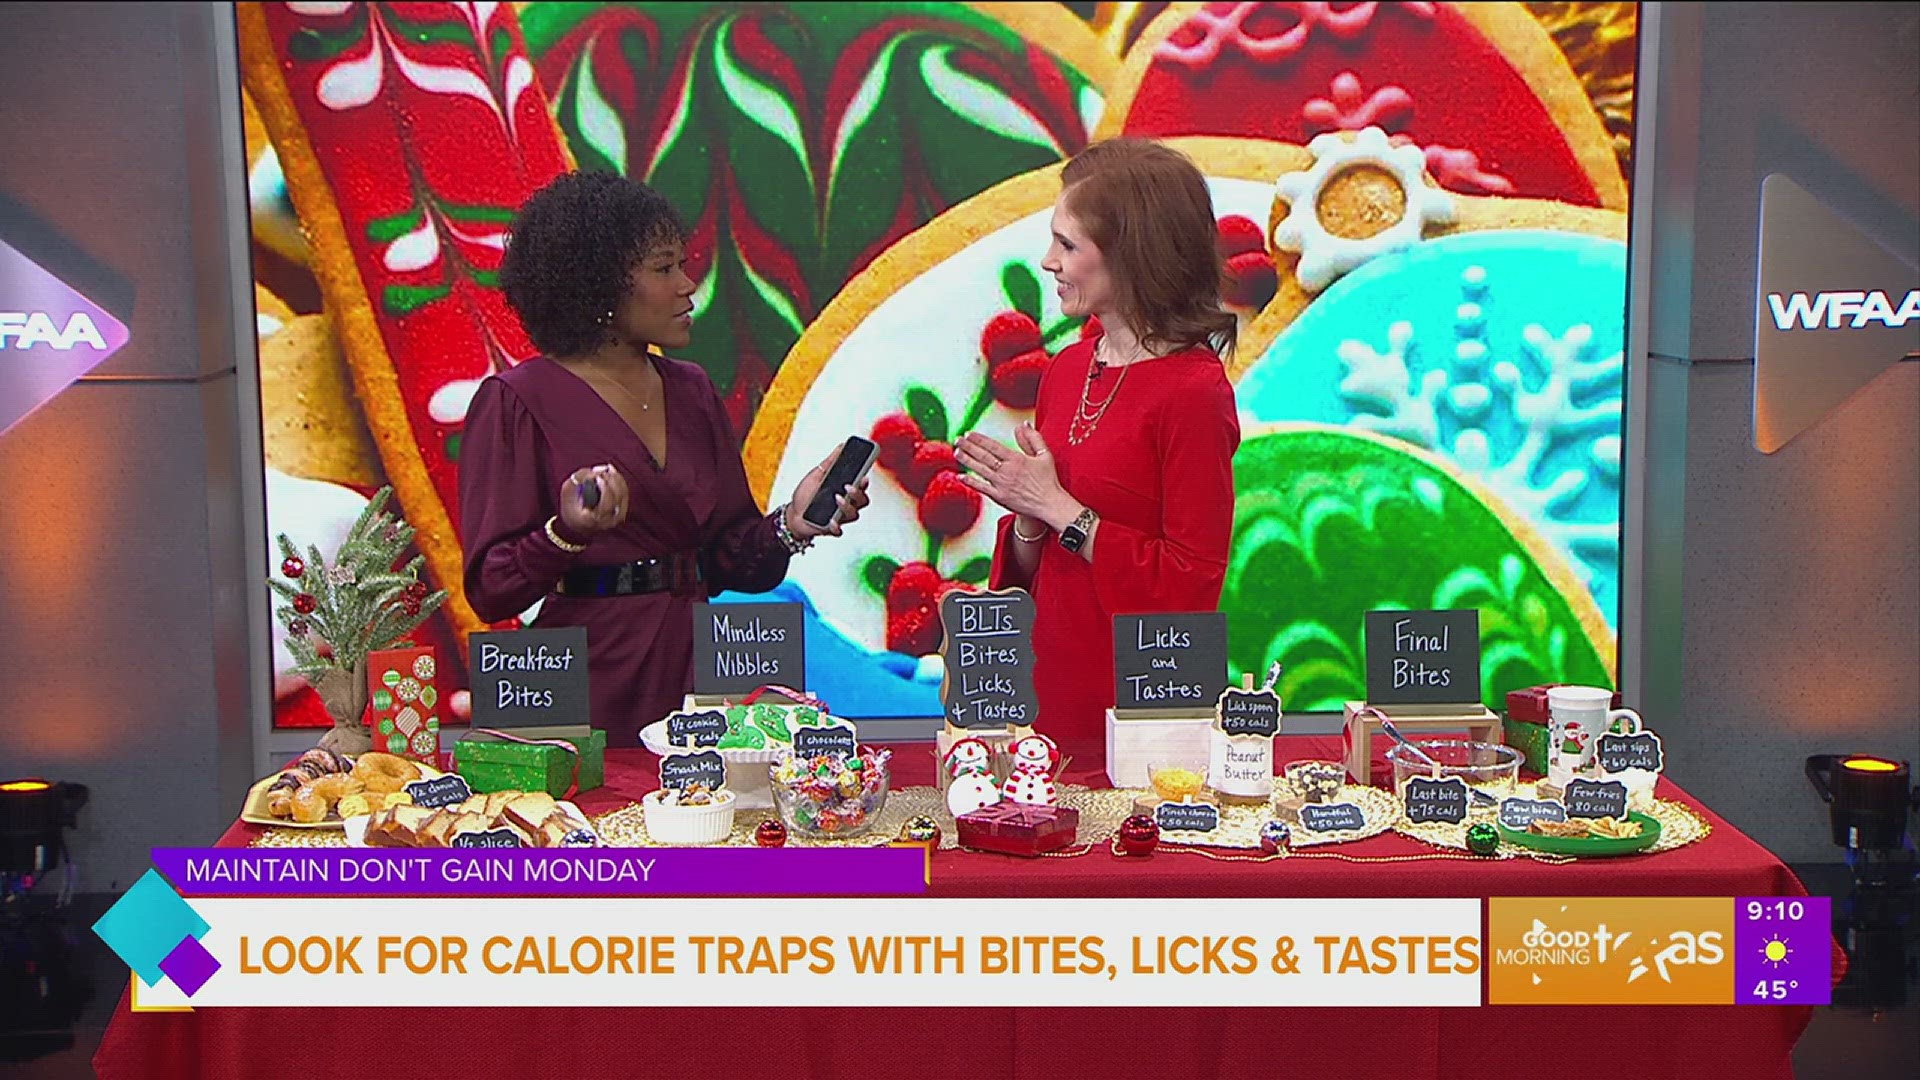 Registered Dietician Amy Goodson explains how to avoid holiday calorie traps with bites, licks and tastes